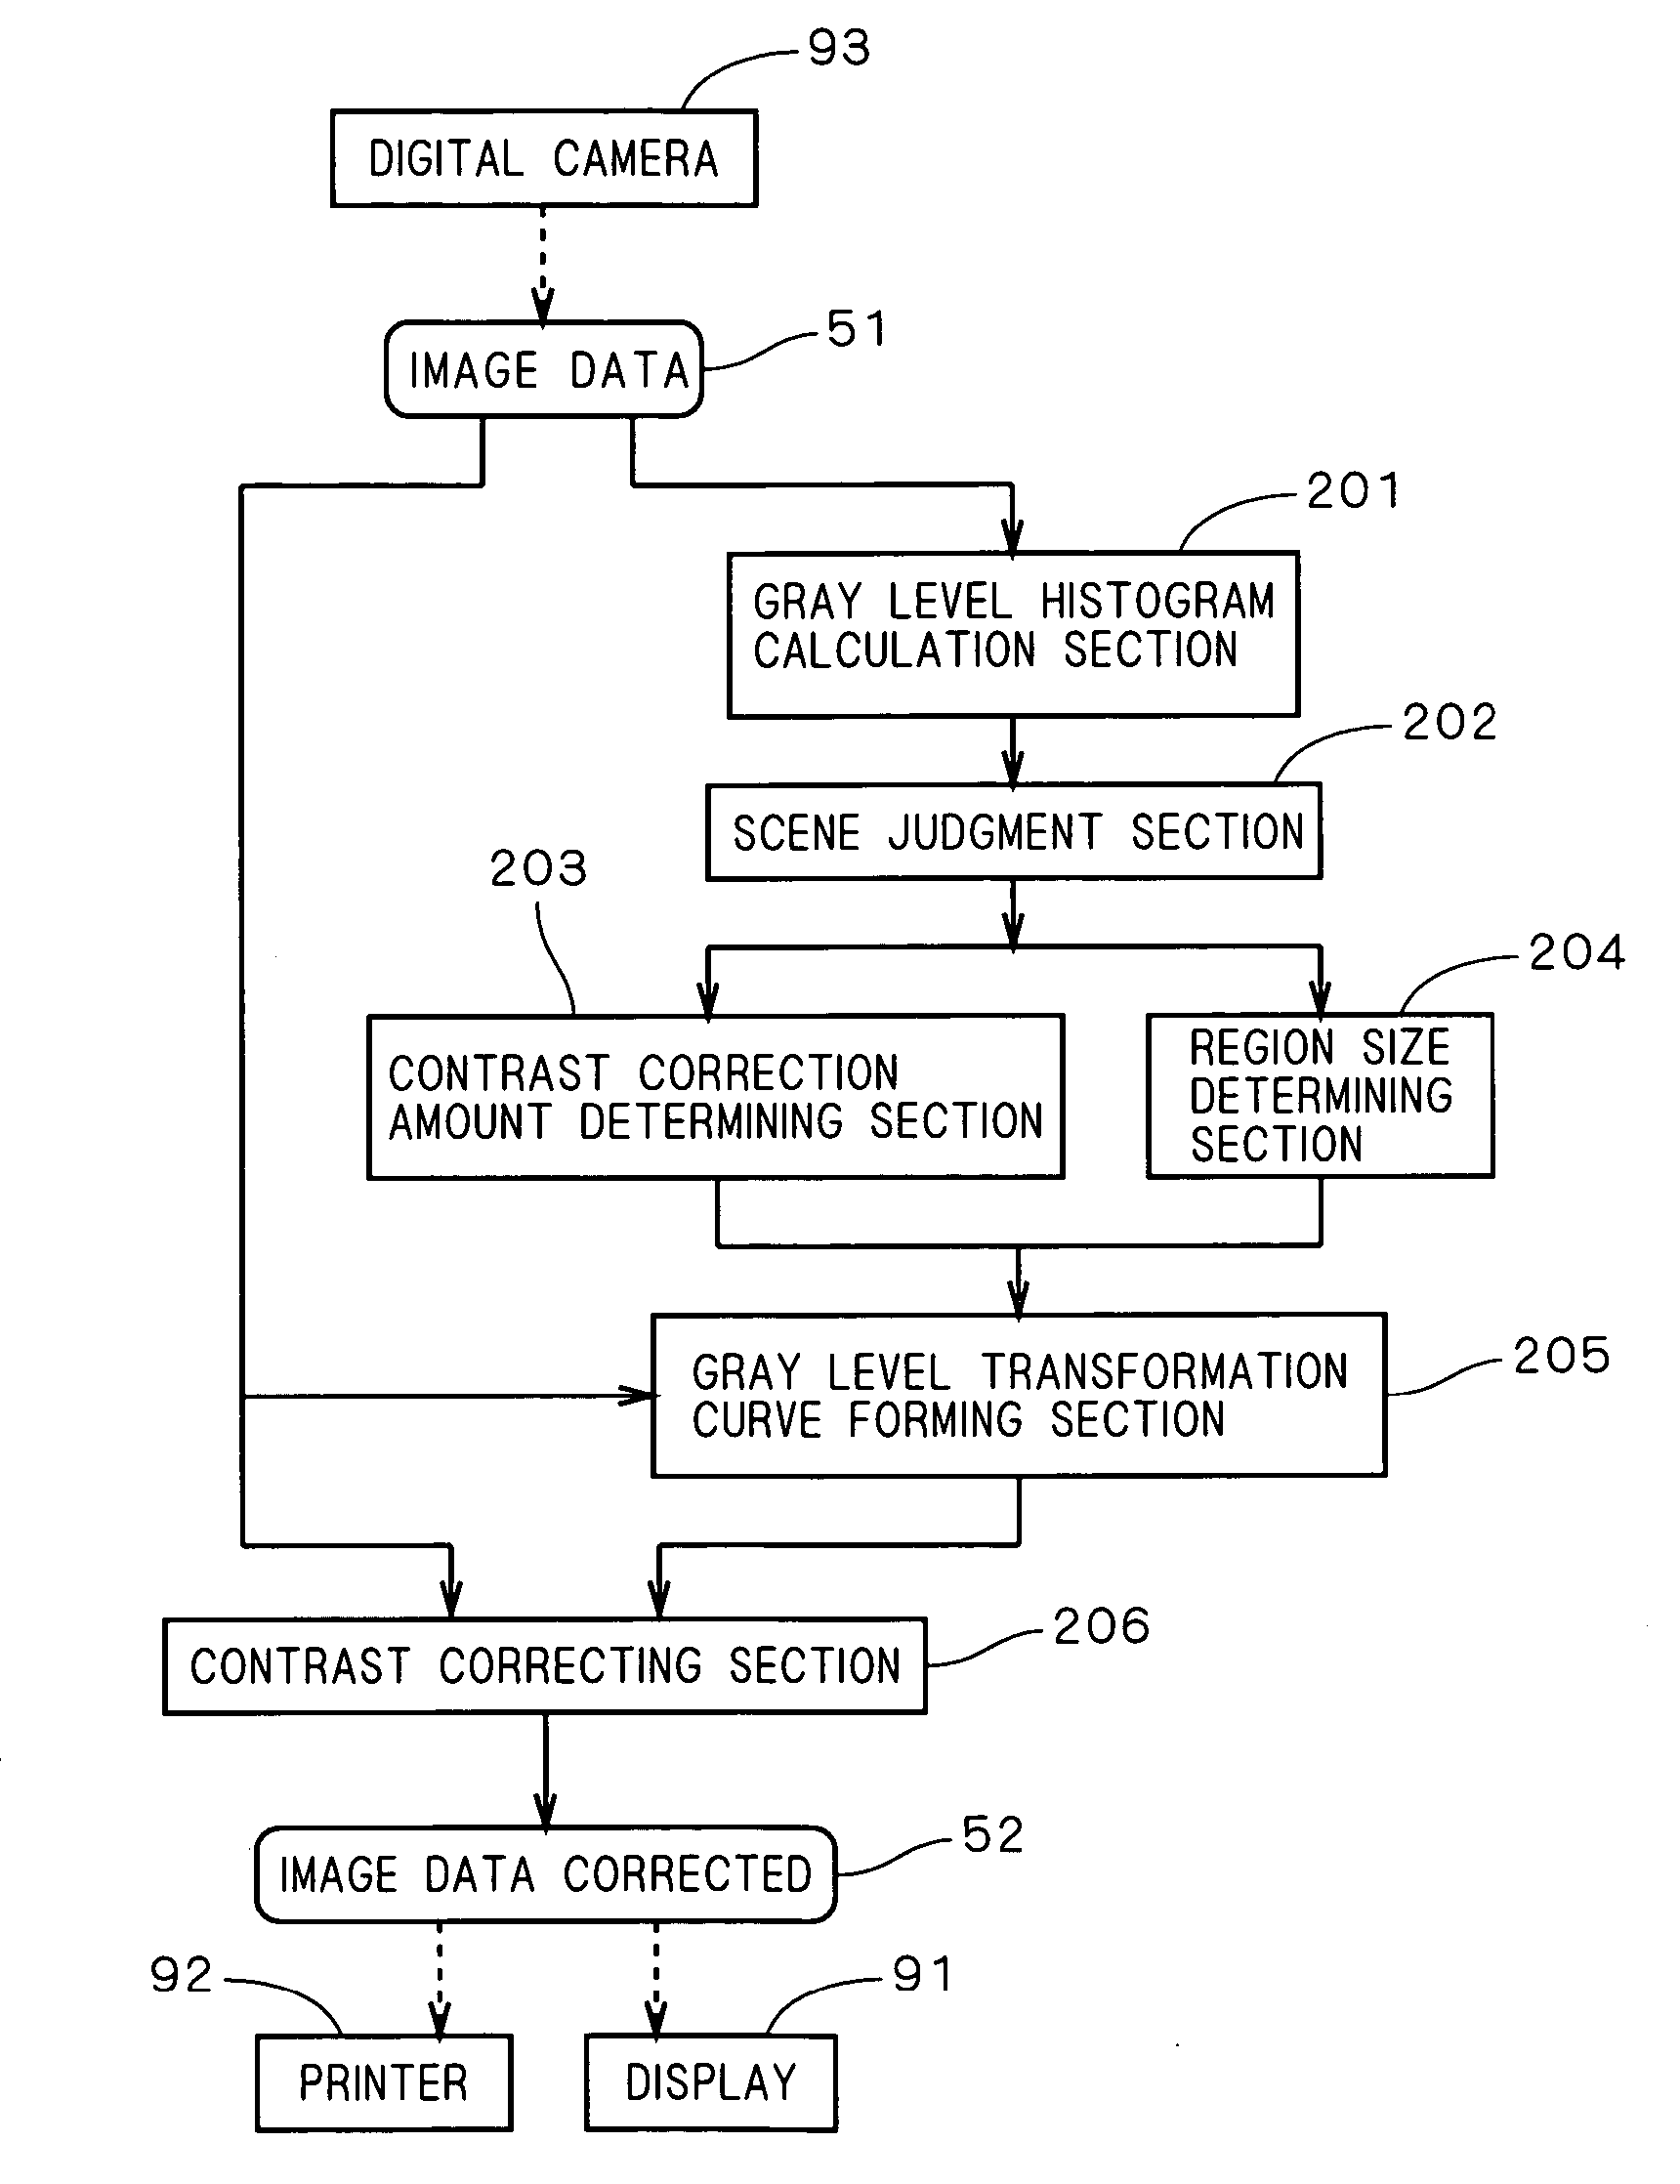 Image processing apparatus for correcting contrast of image